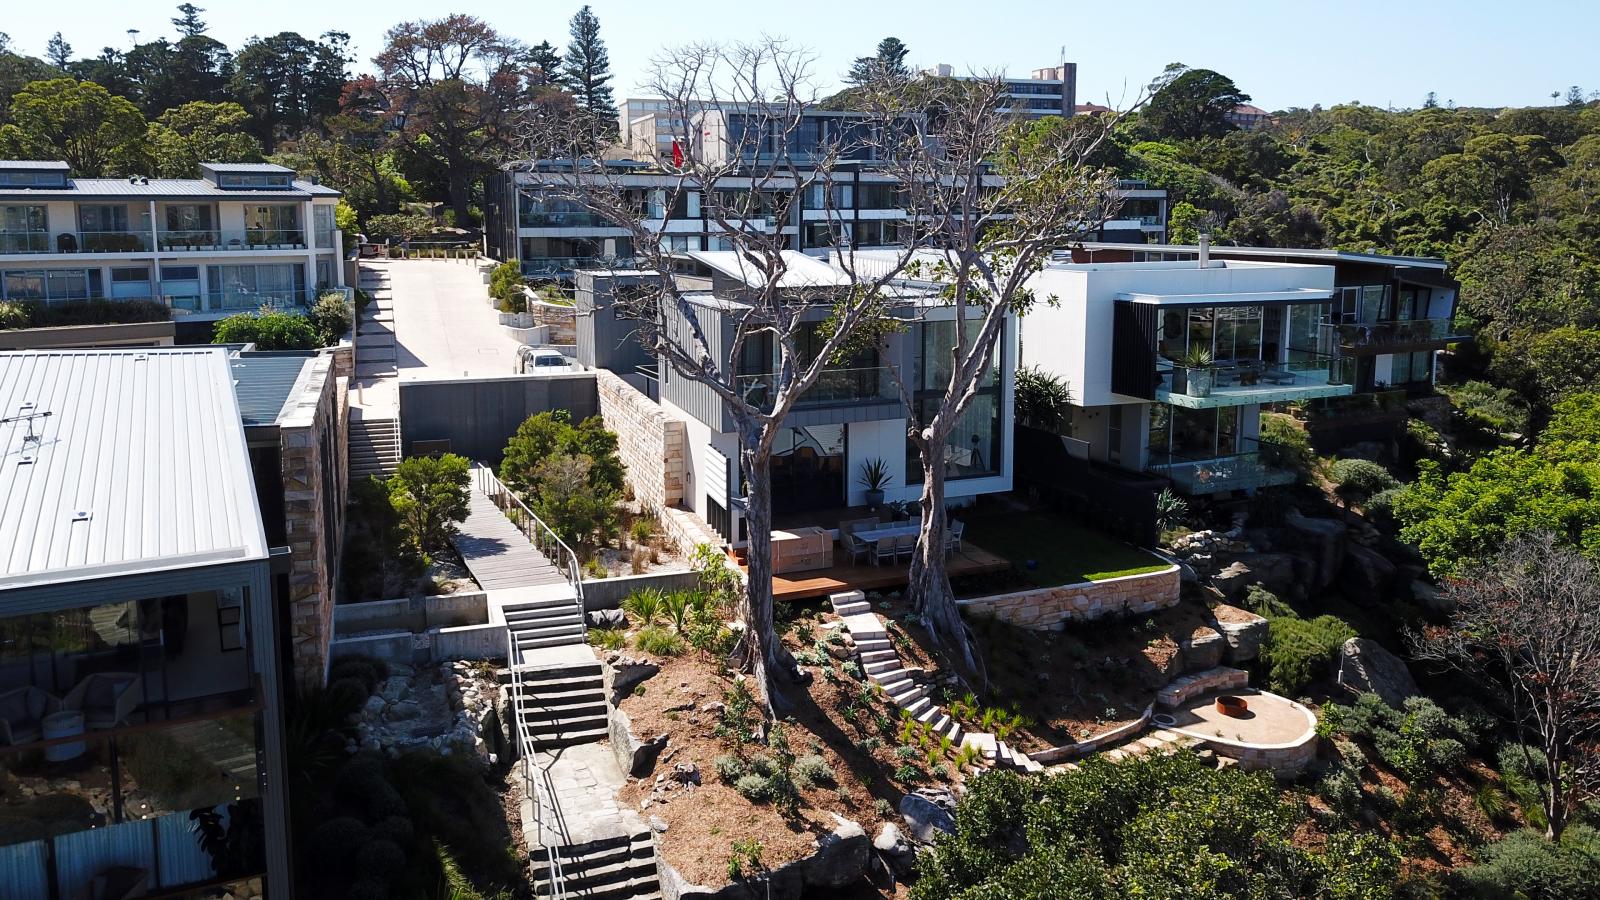 Aerial view of modern multi-story homes with large glass windows and balconies in Manly's Spring Cove, surrounded by lush greenery. A set of stairs leads up to the houses, and the area features various landscaped plants and trees.